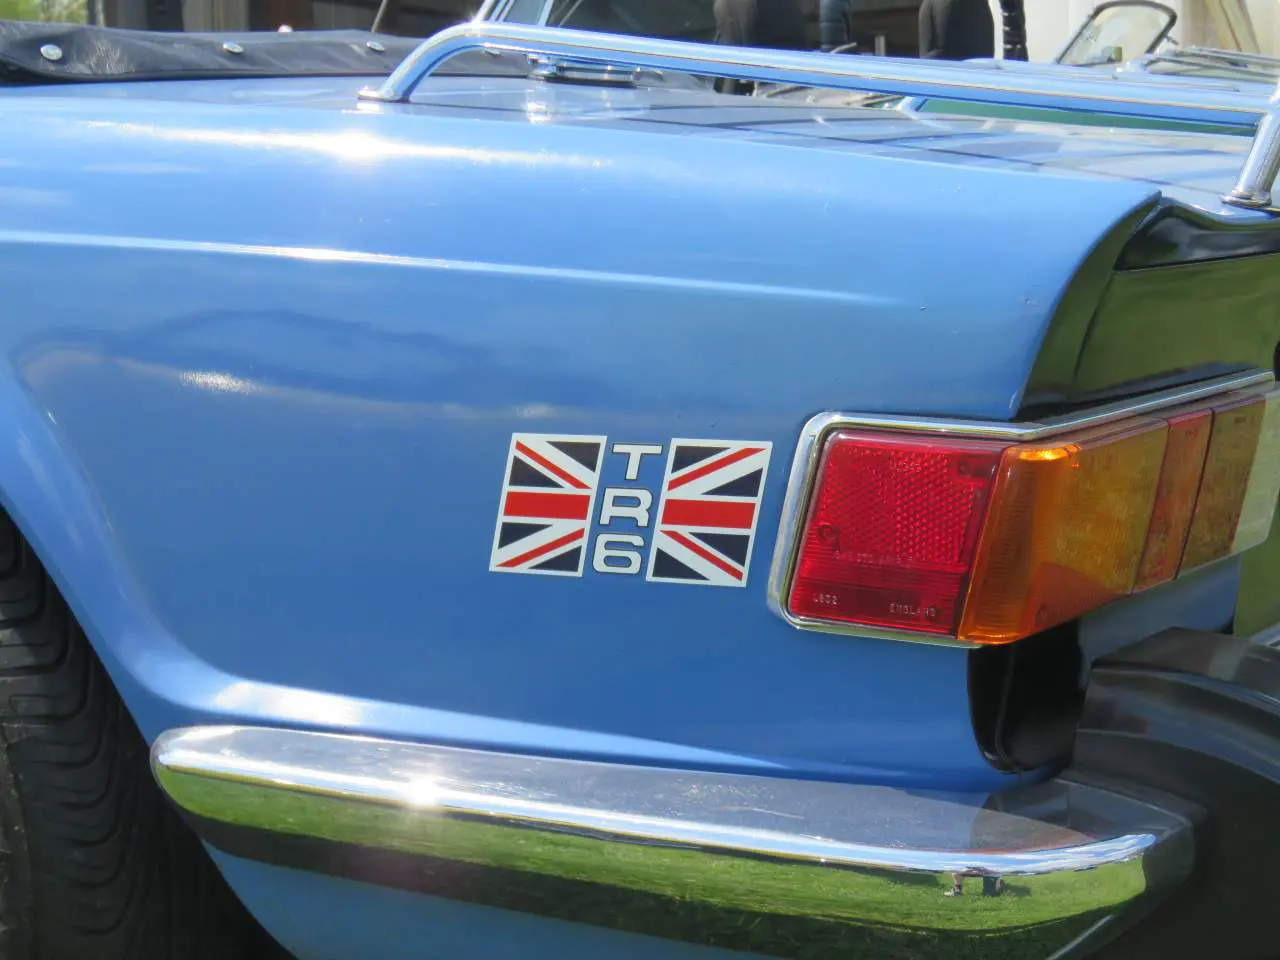 A close up of the rear end of an old car